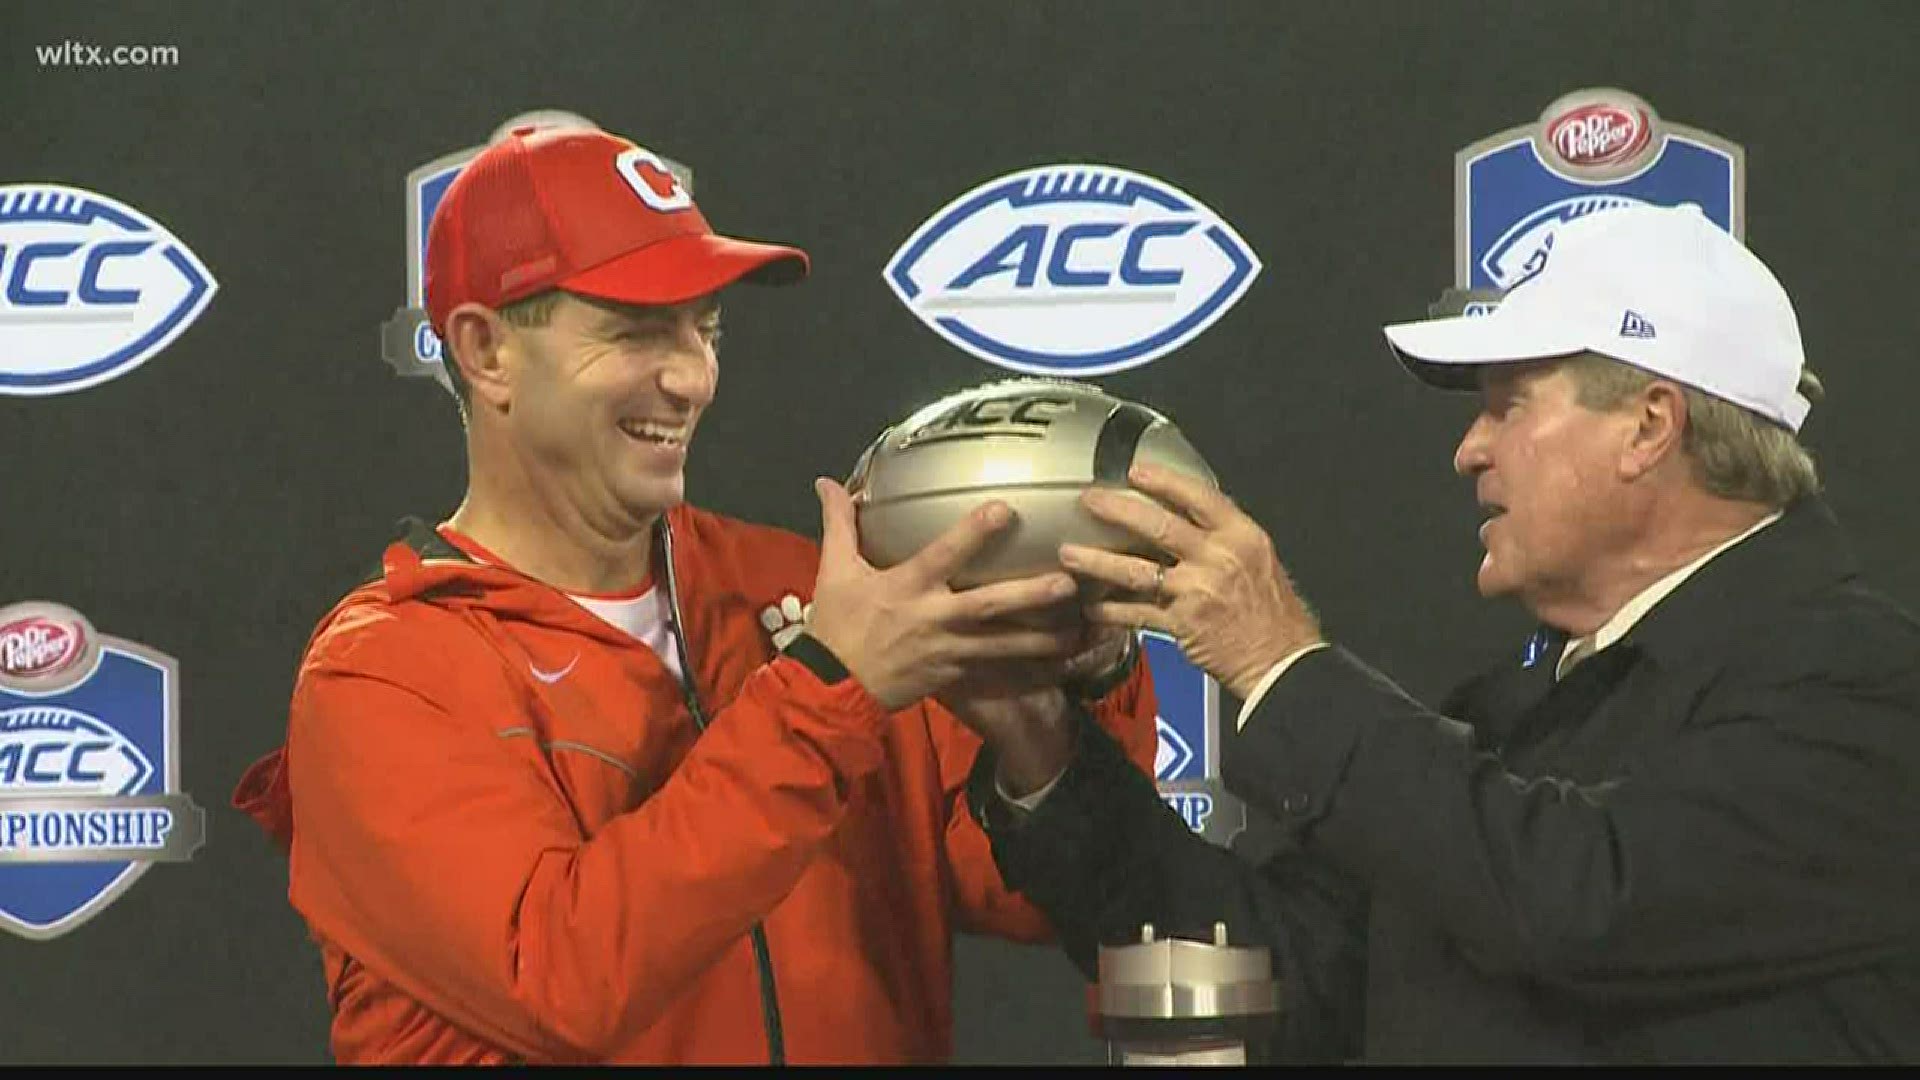 In Clemson's 5 straight trips to the CFB Playoff, ACC Commissioner John Swofford has been a part of the ride, handing the ACC Championship trophies to Dabo Swinney.